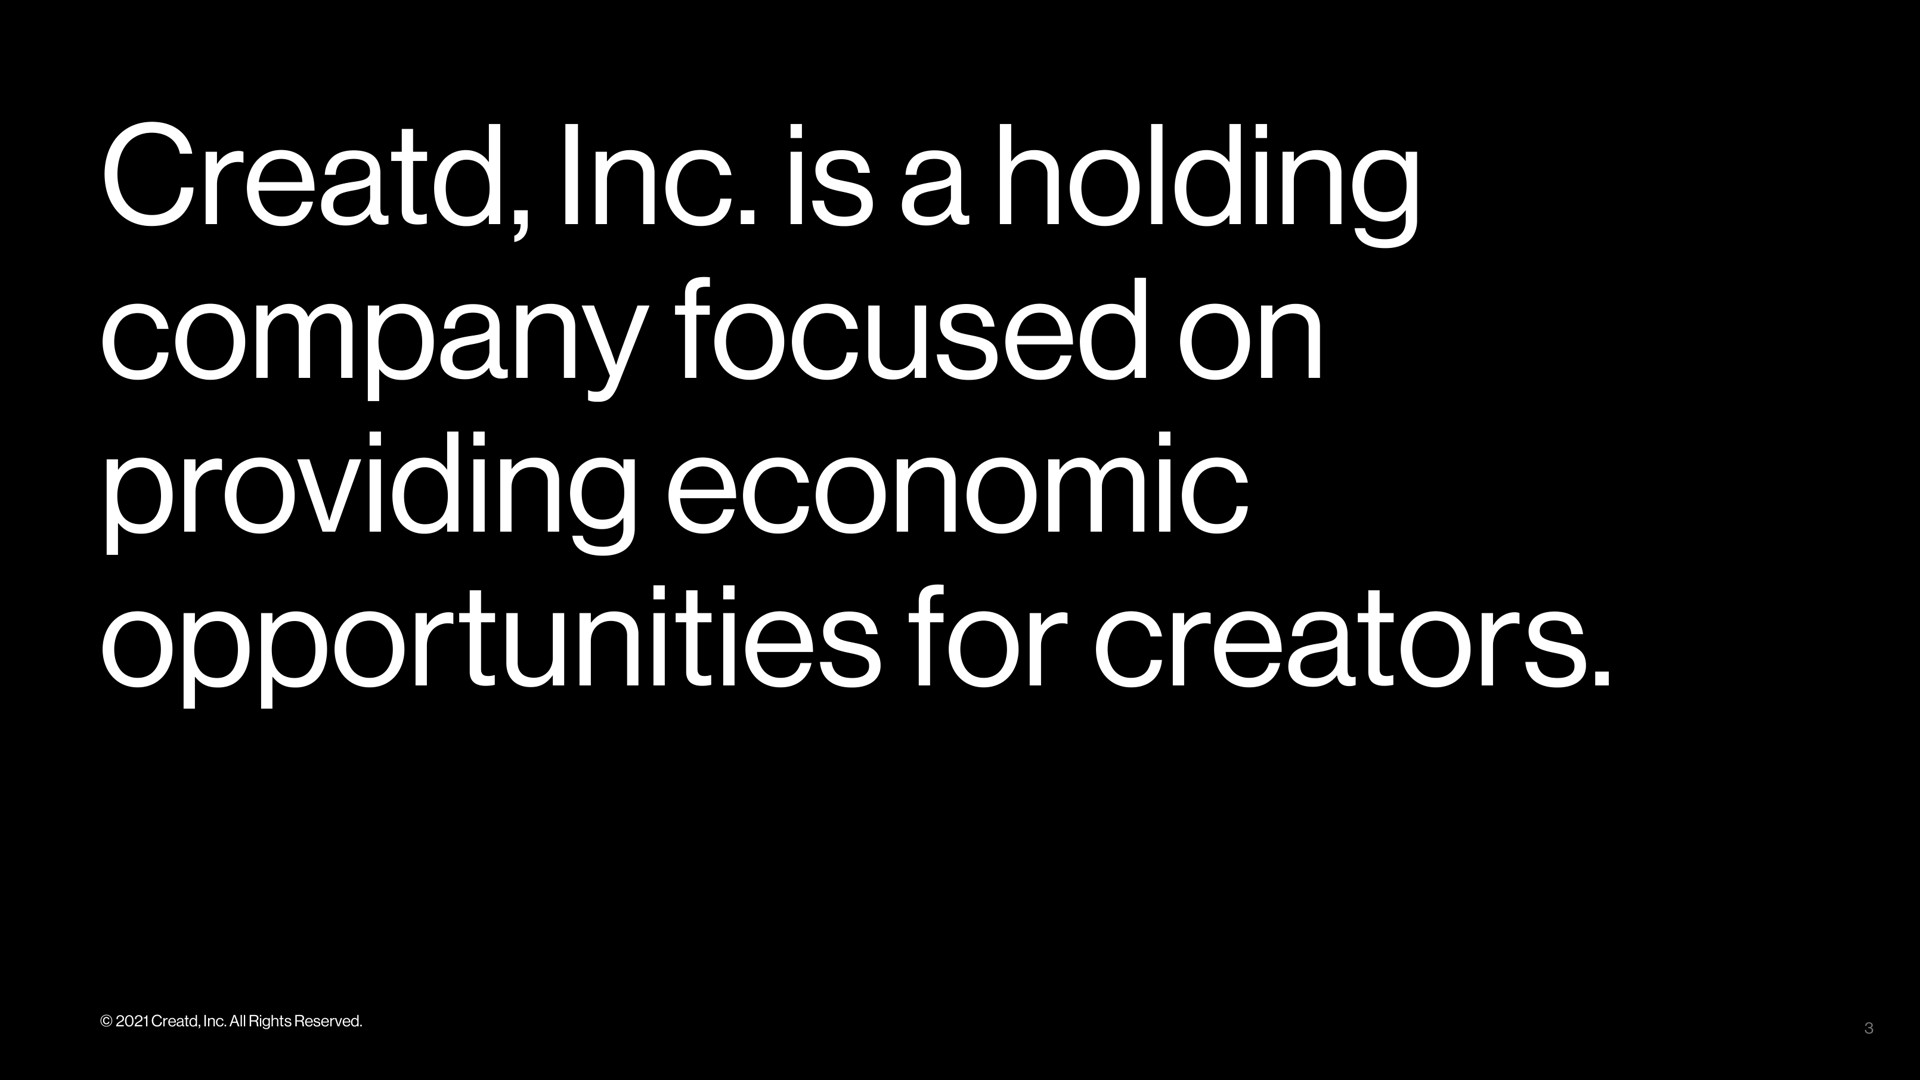 is a holding company focused on providing economic opportunities for creators | Creatd